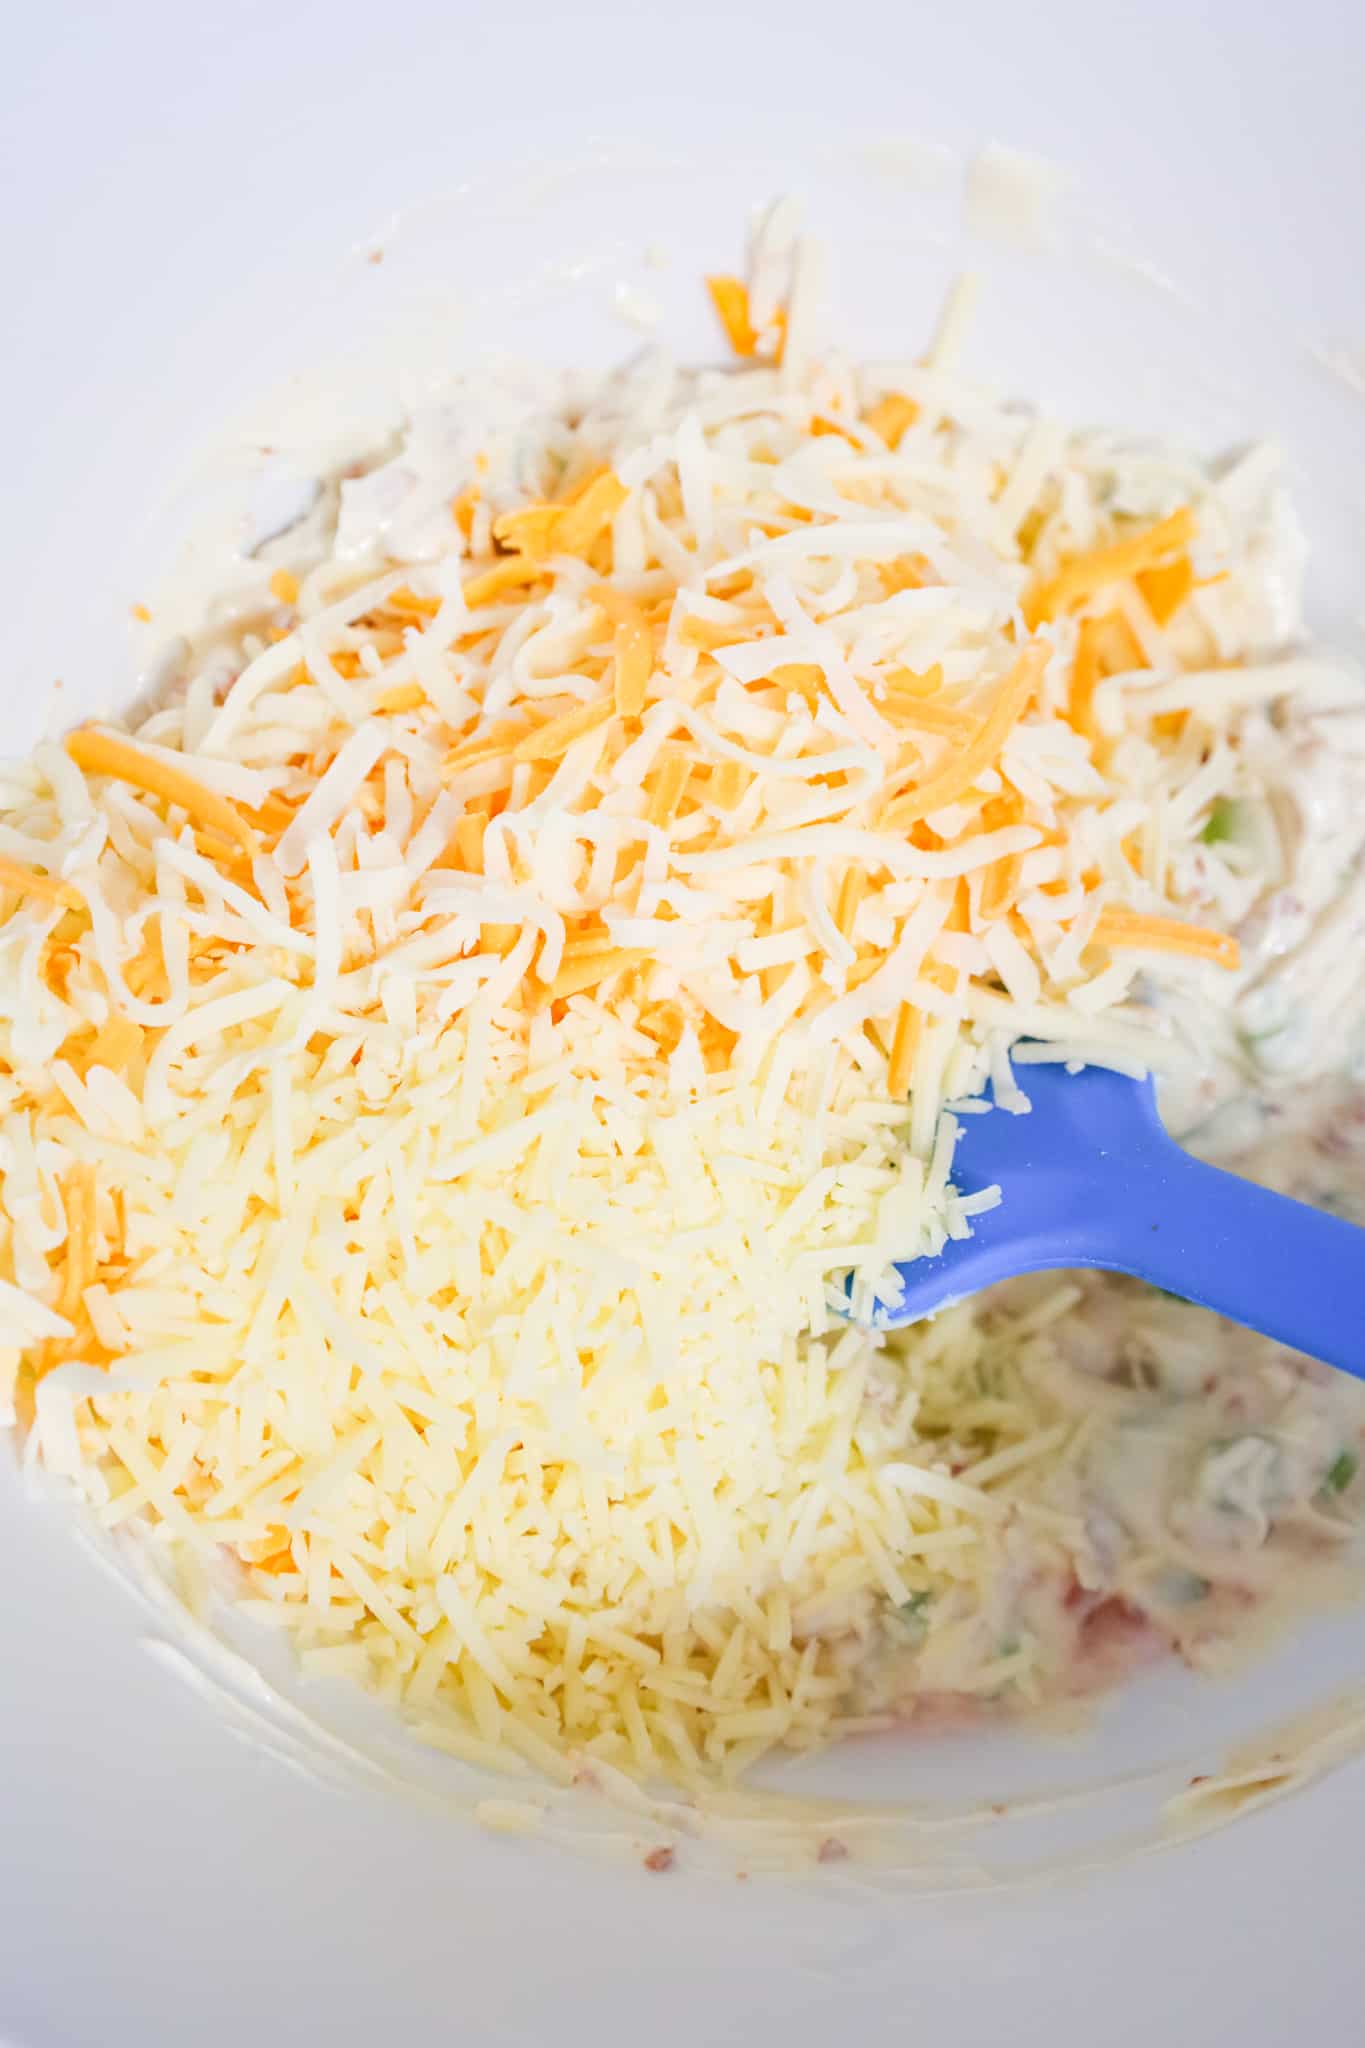 shredded parmesan, mozzarella and cheddar cheese on top of mayo mixture in a mixing bowl